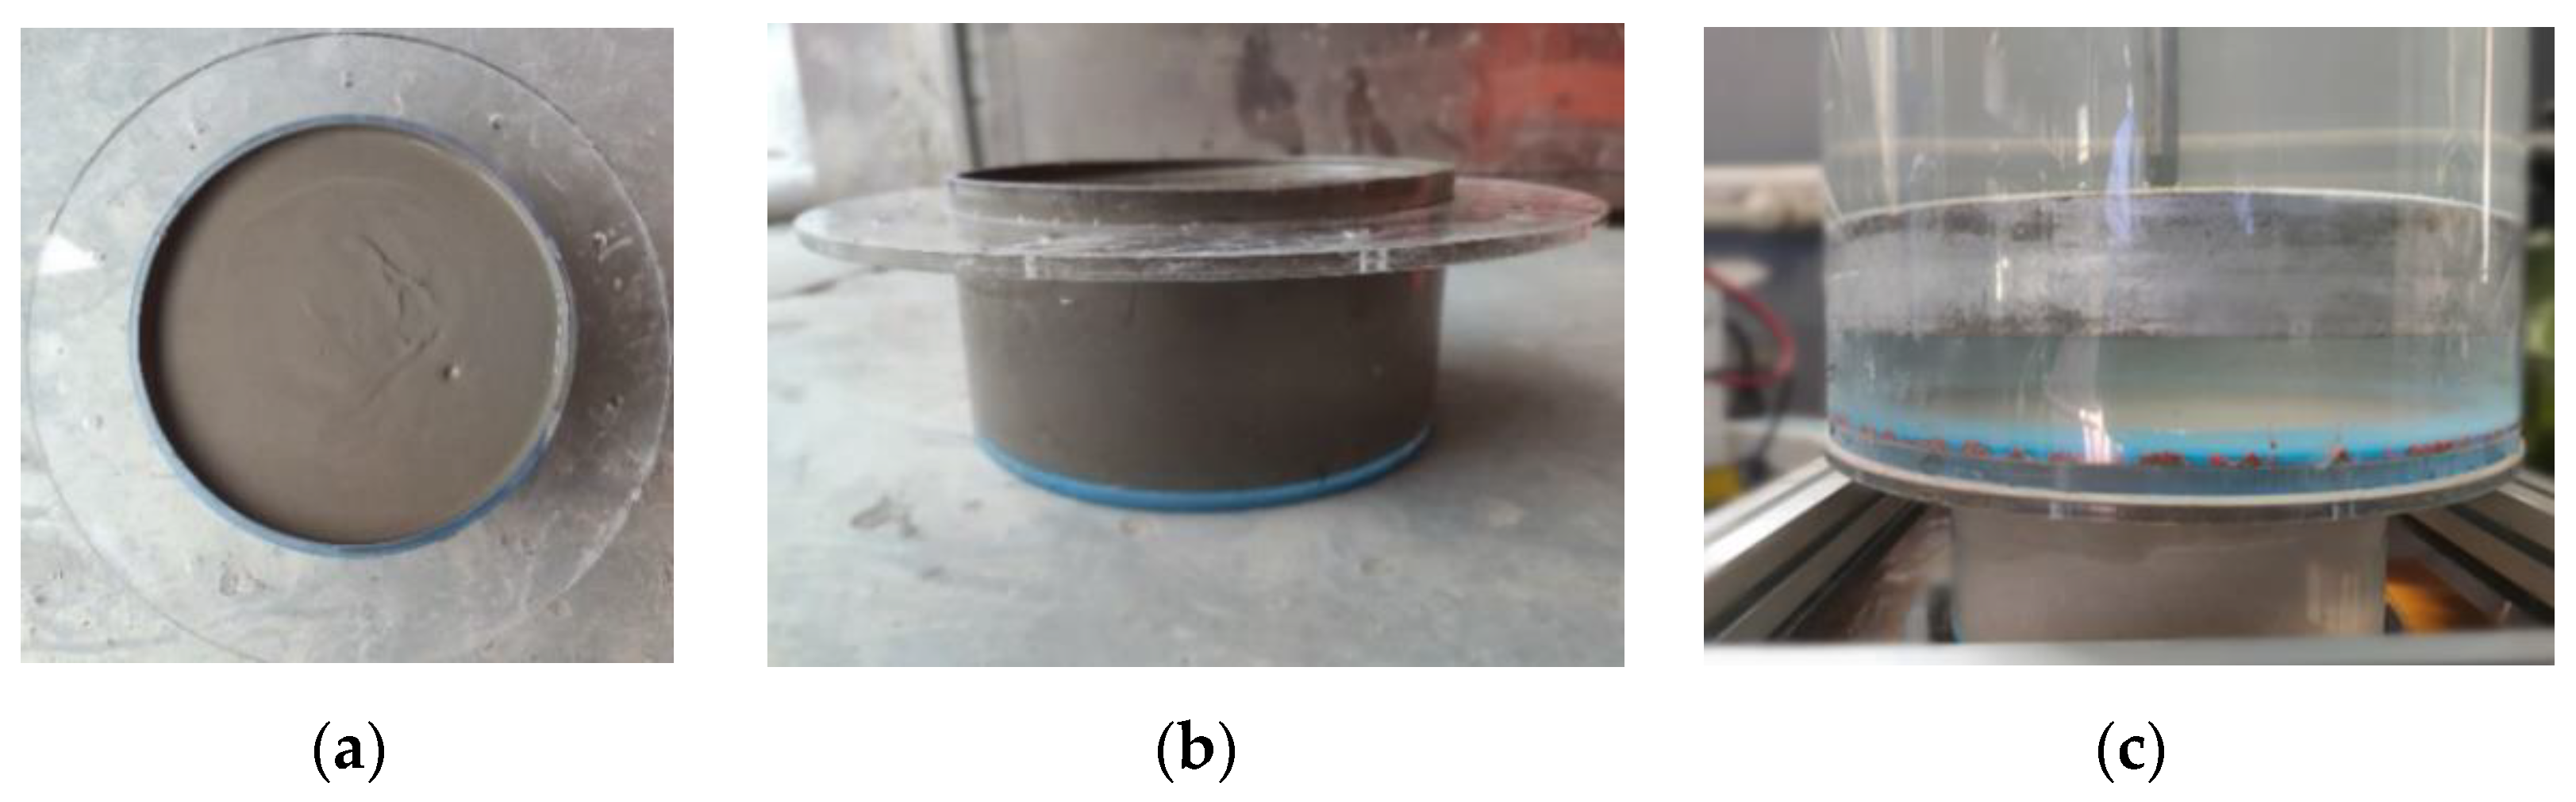 JMSE | Free Full-Text | An Investigation of the Effect of Utilizing  Solidified Soil as Scour Protection for Offshore Wind Turbine Foundations  via a Simplified Scour Resistance Test